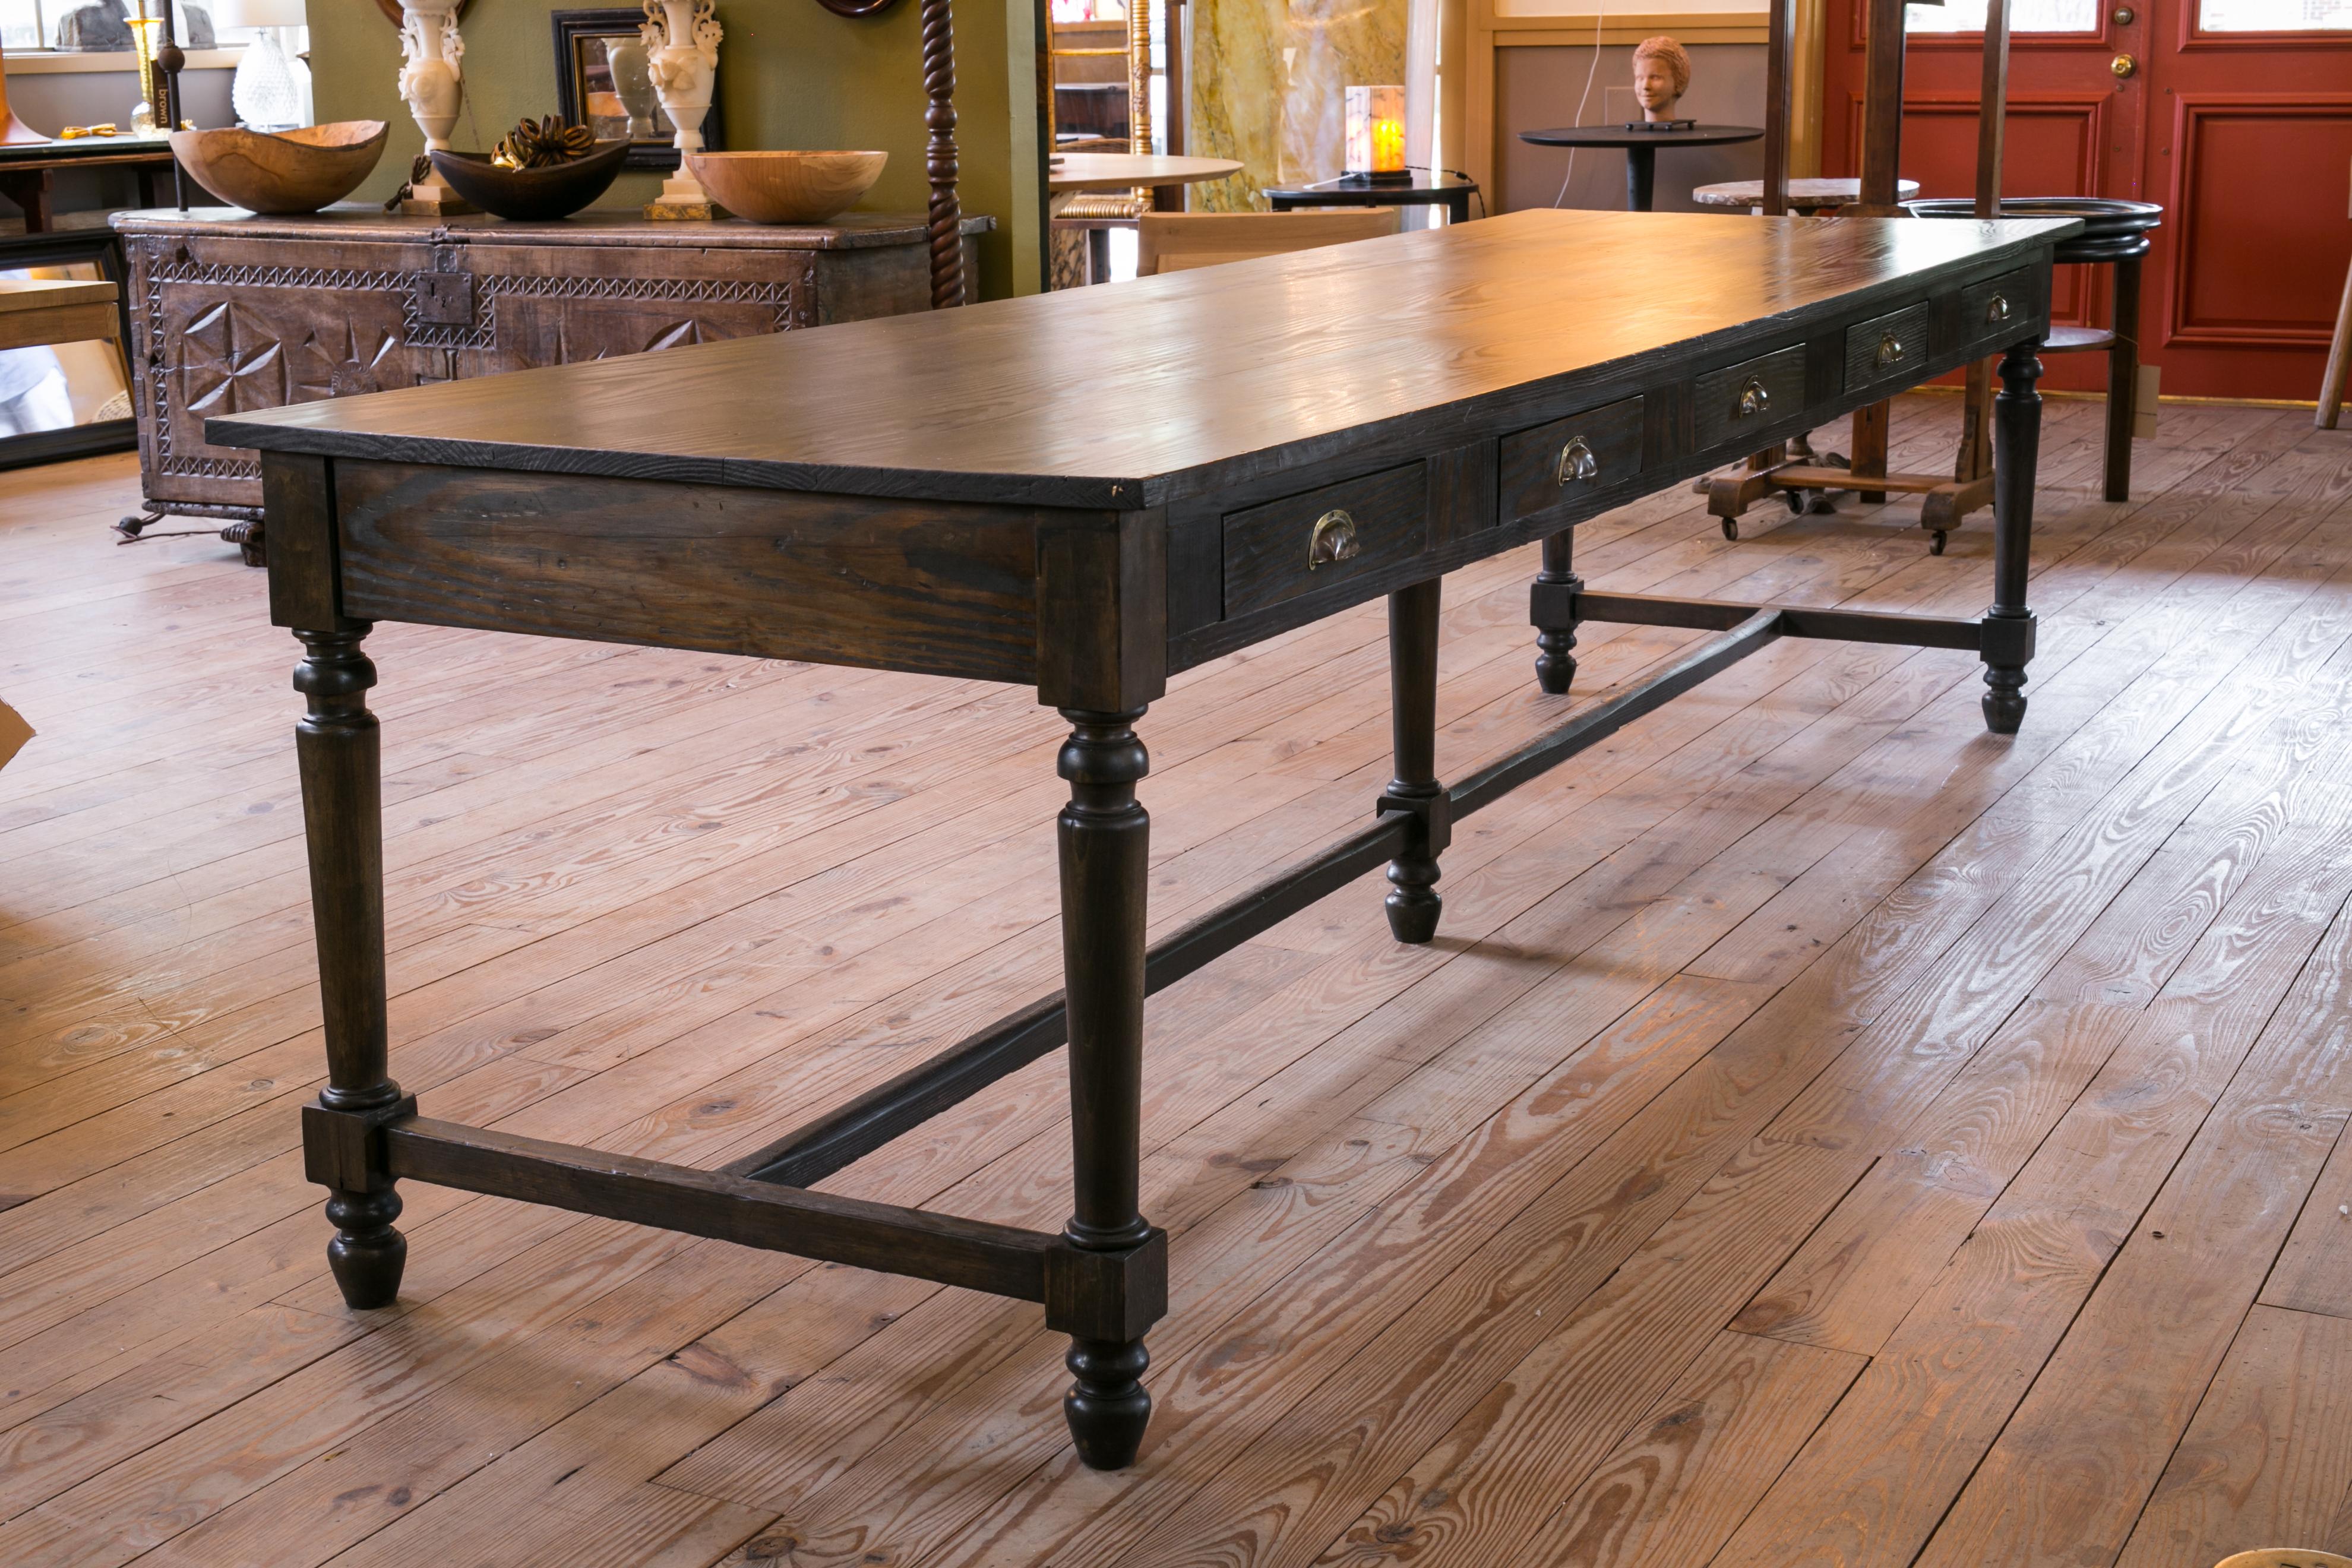 Unusually long country table of antique pine. This table is interesting and quite long. It has five drawers on each side and hails from a monastery. The grain of the wood is beautiful. The table is simple in shape and its drawers could be fun for